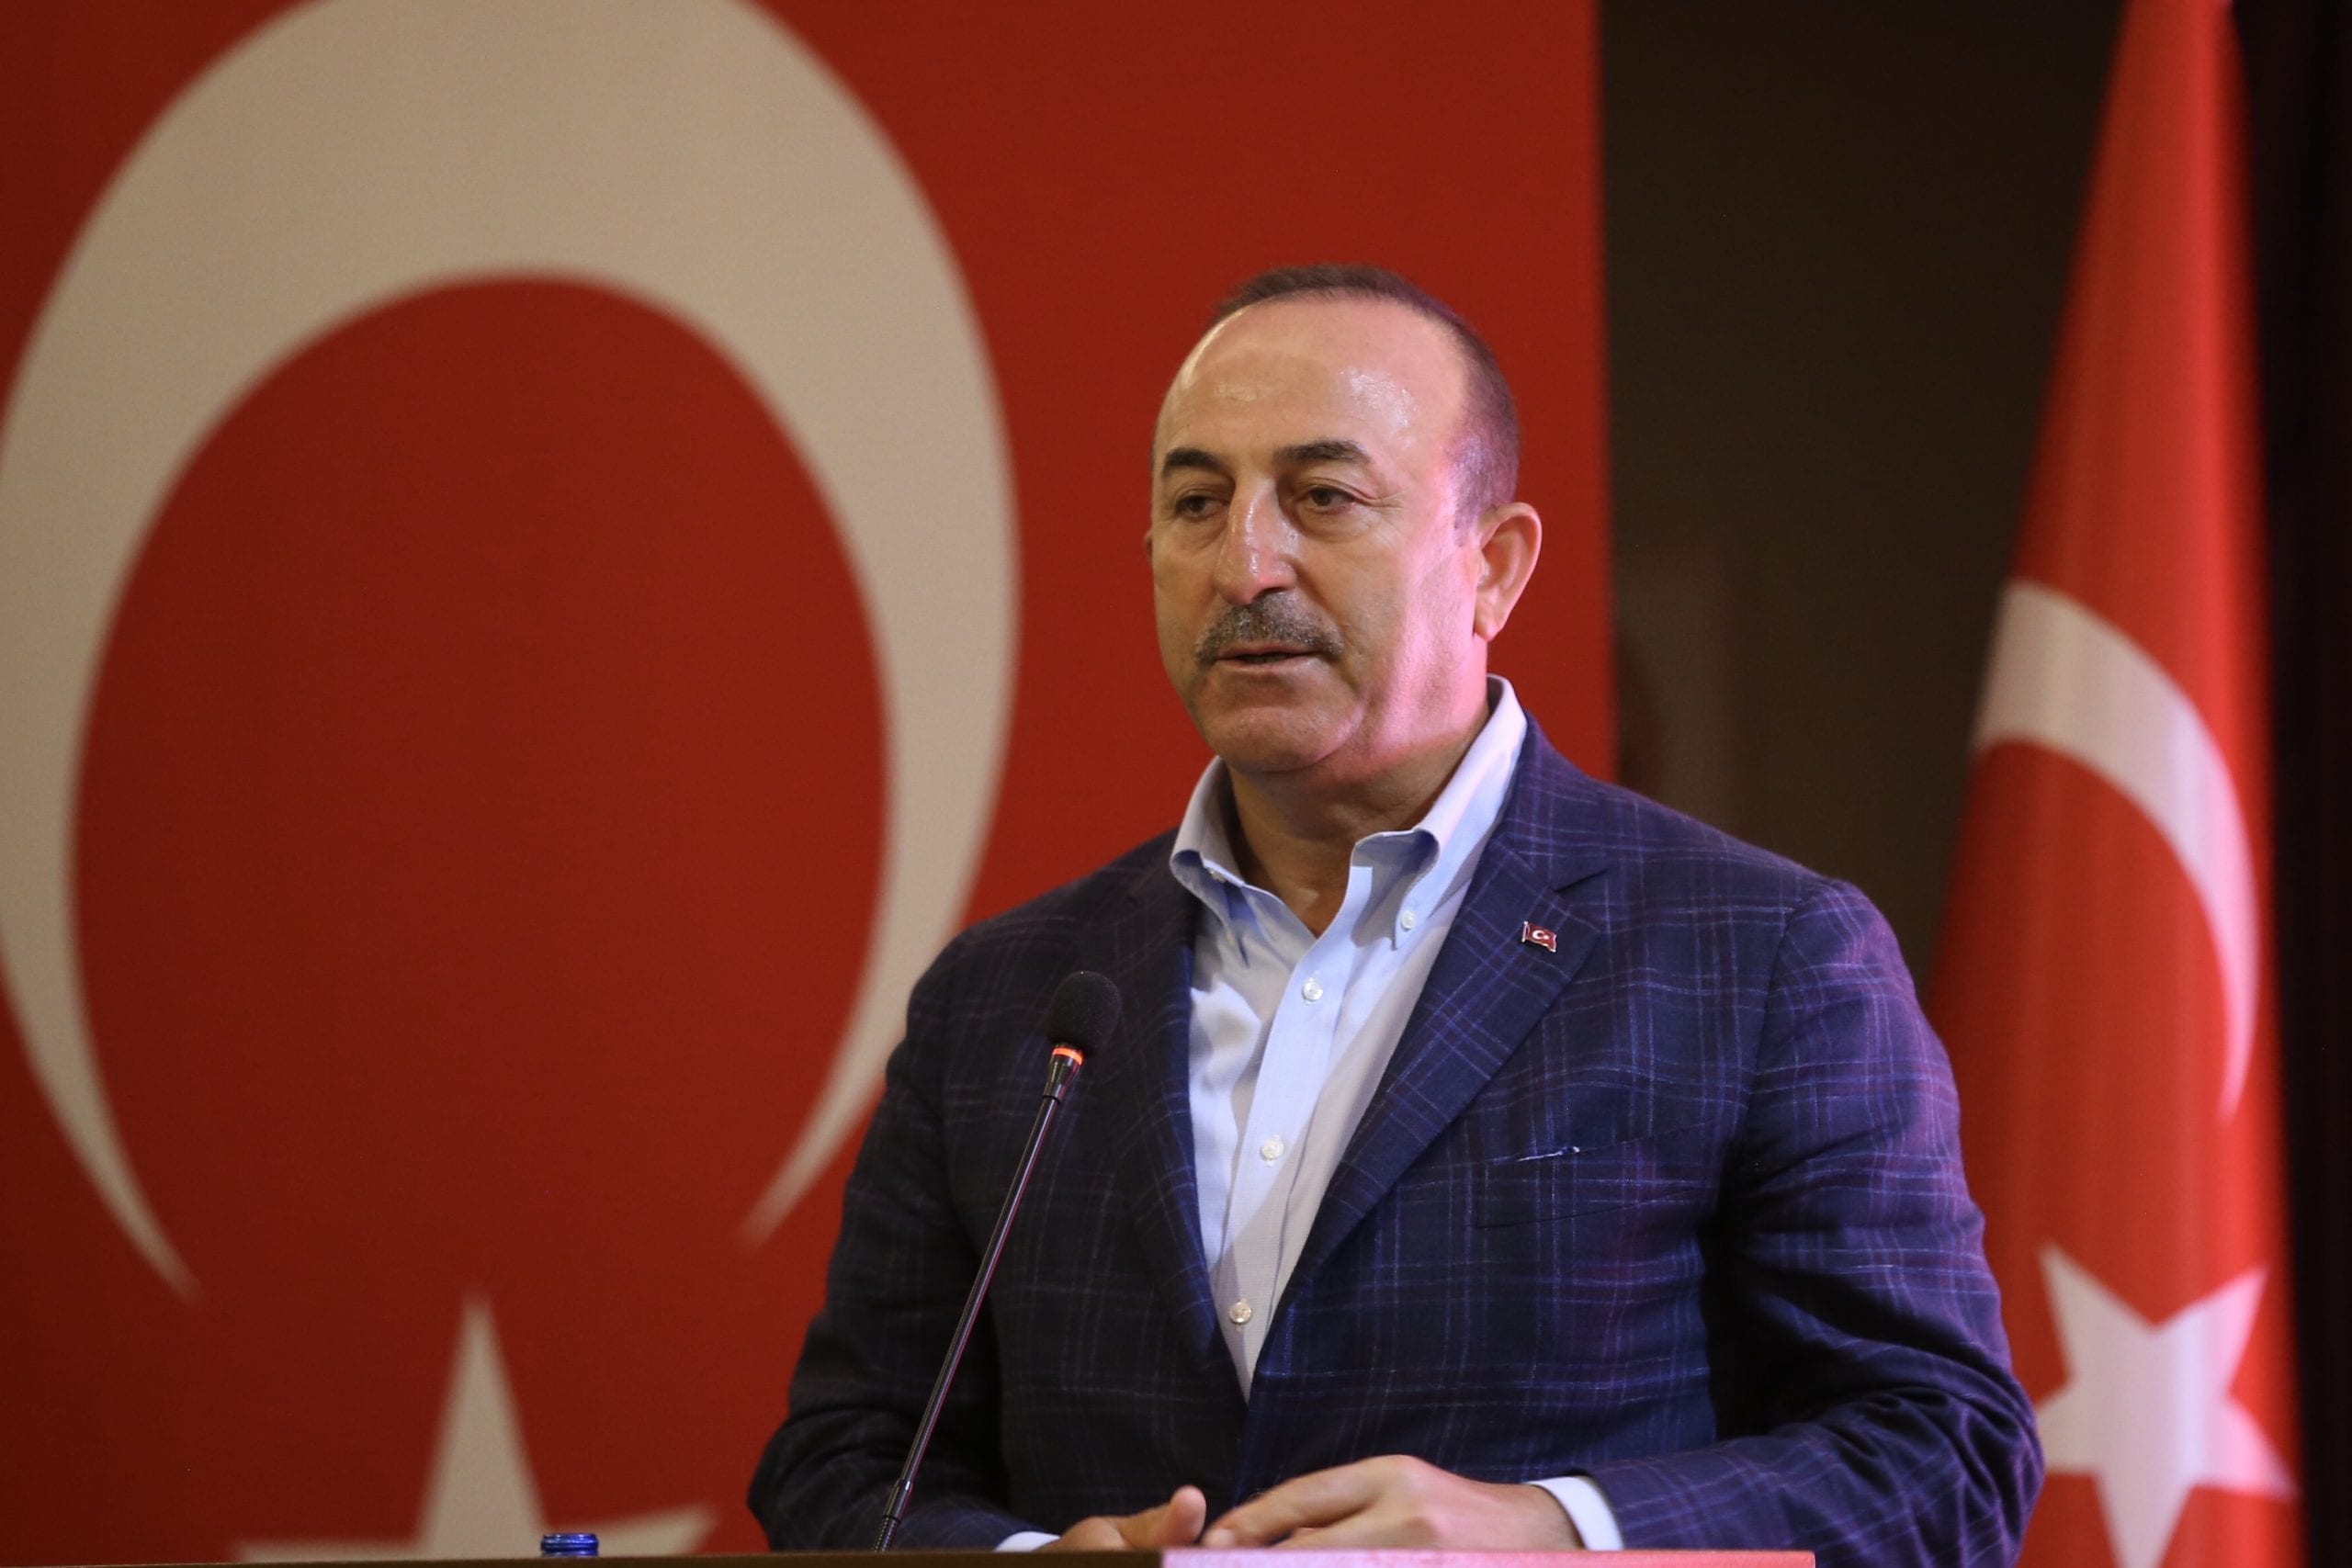 Turkey became one of most successful countries in fight against virus, FM Çavuşoğlu says